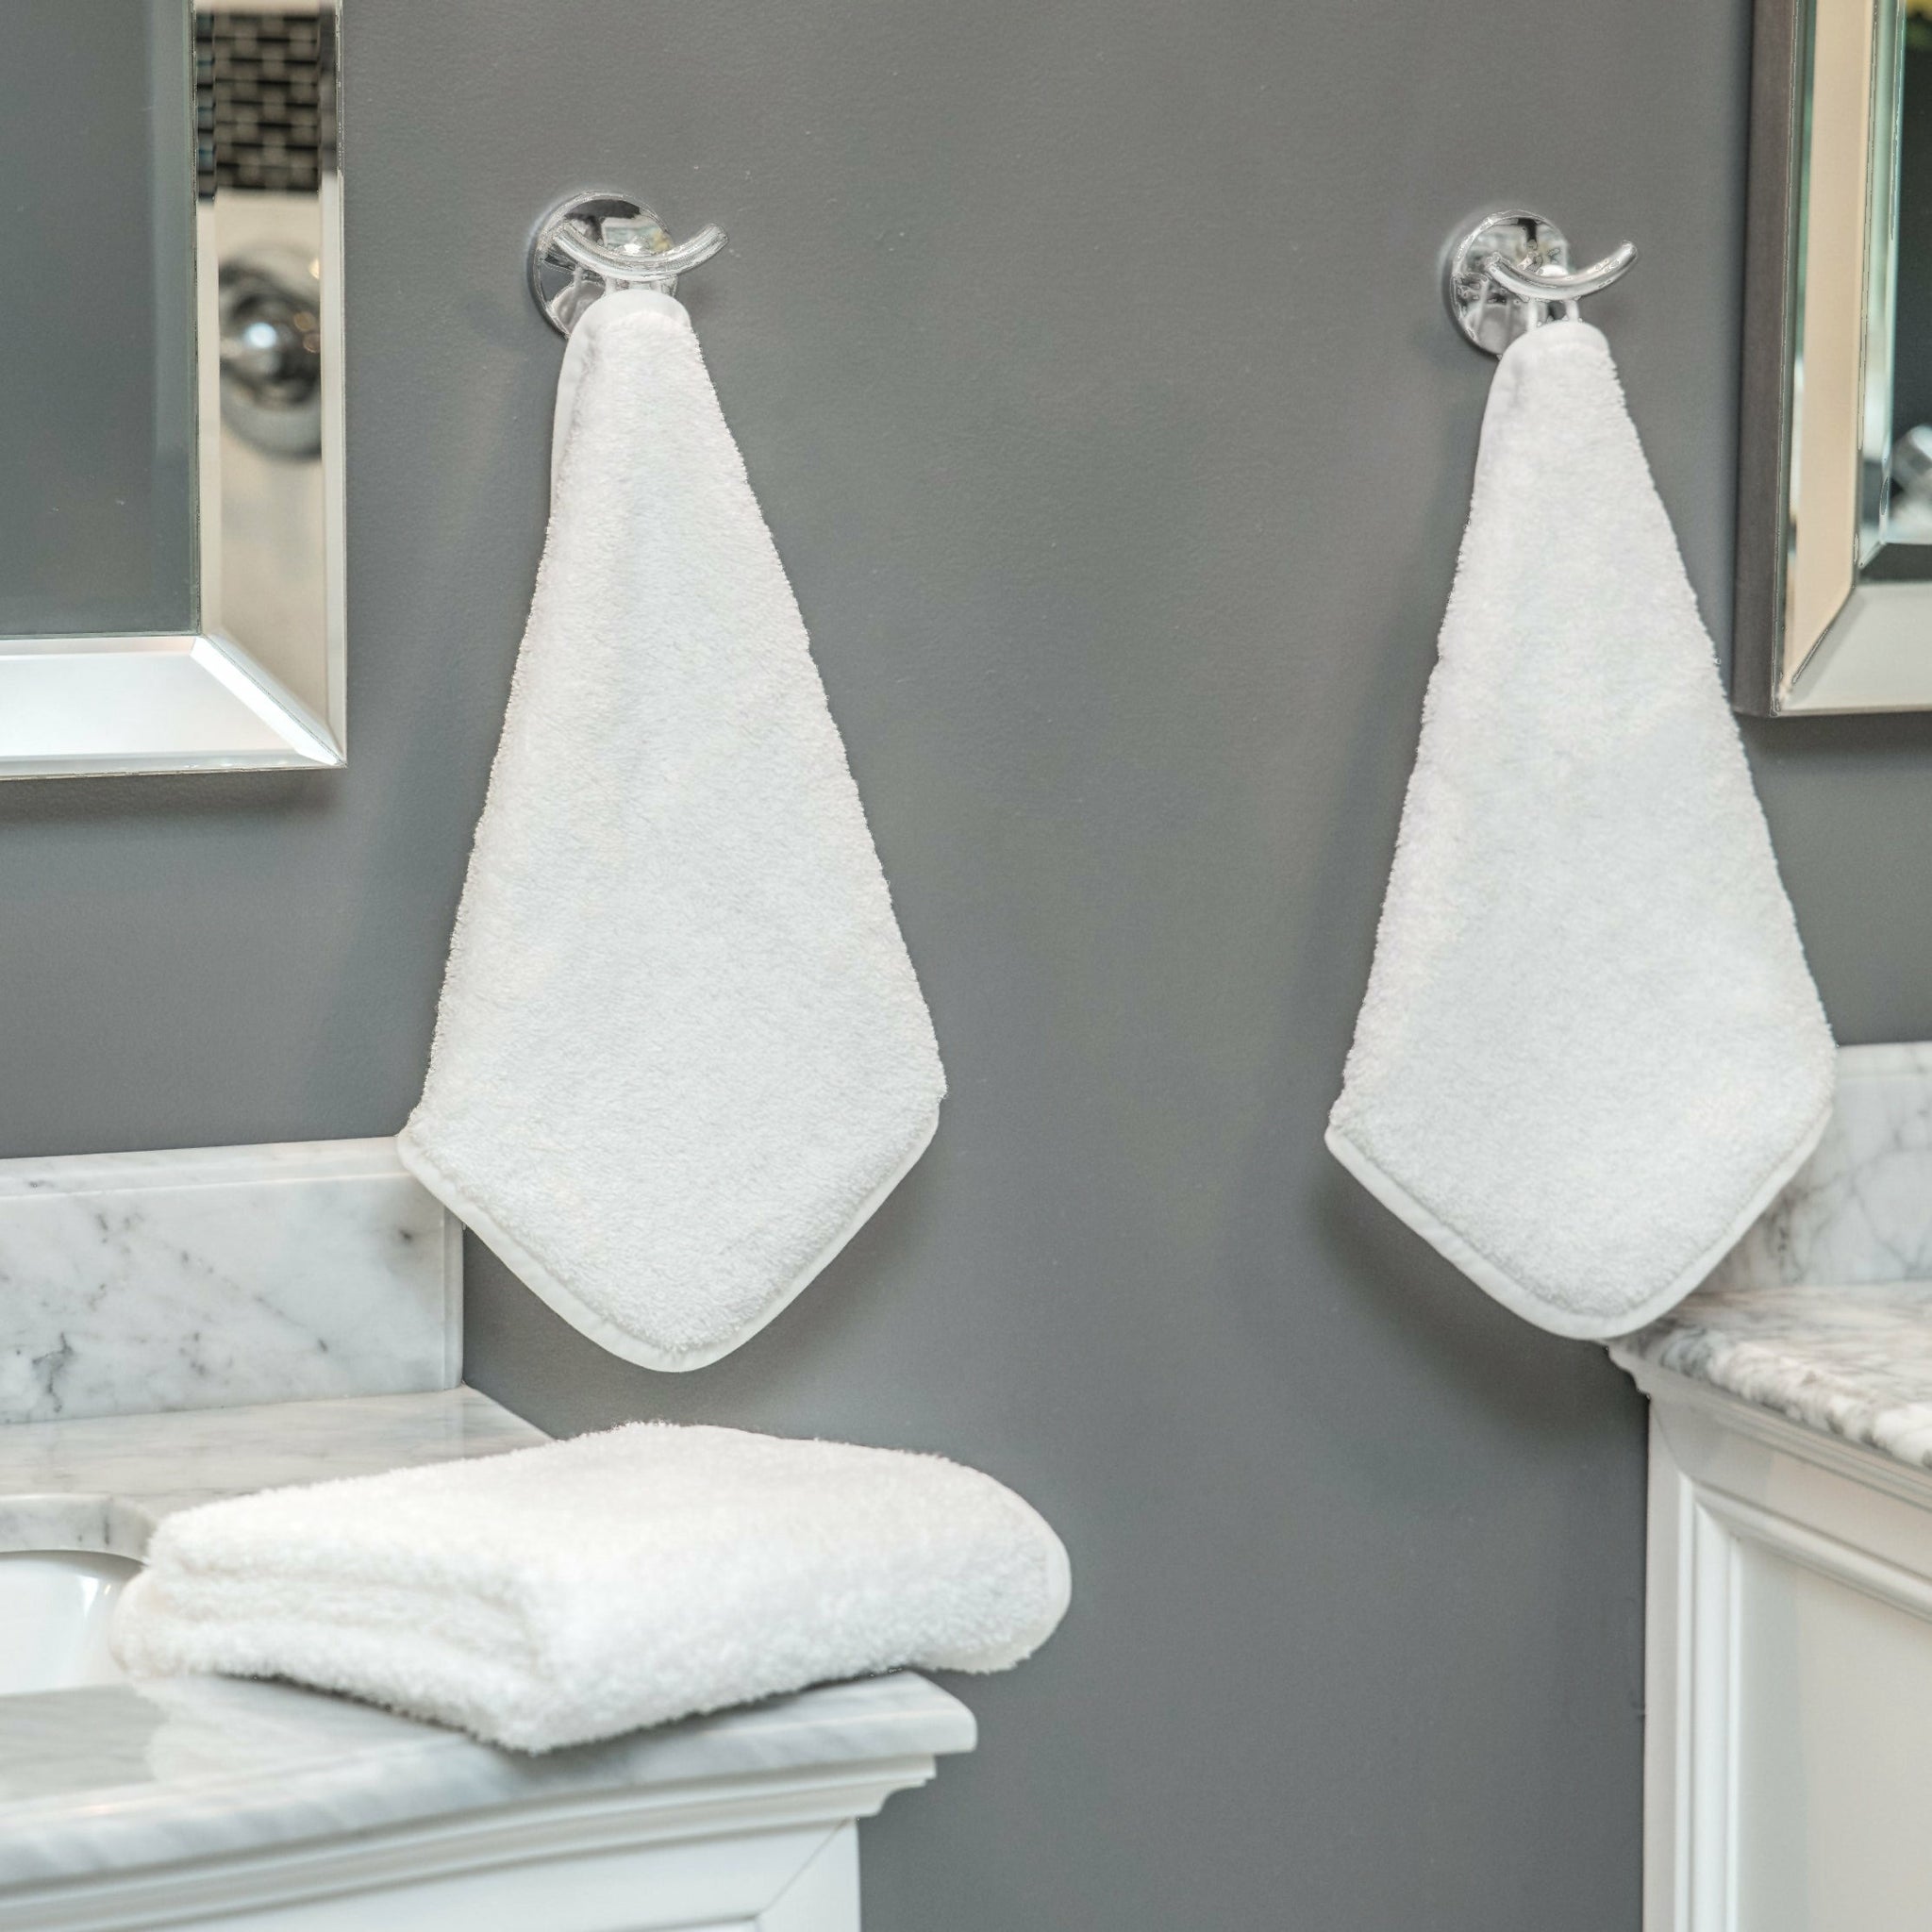 Gray Bath Travel Towels for sale